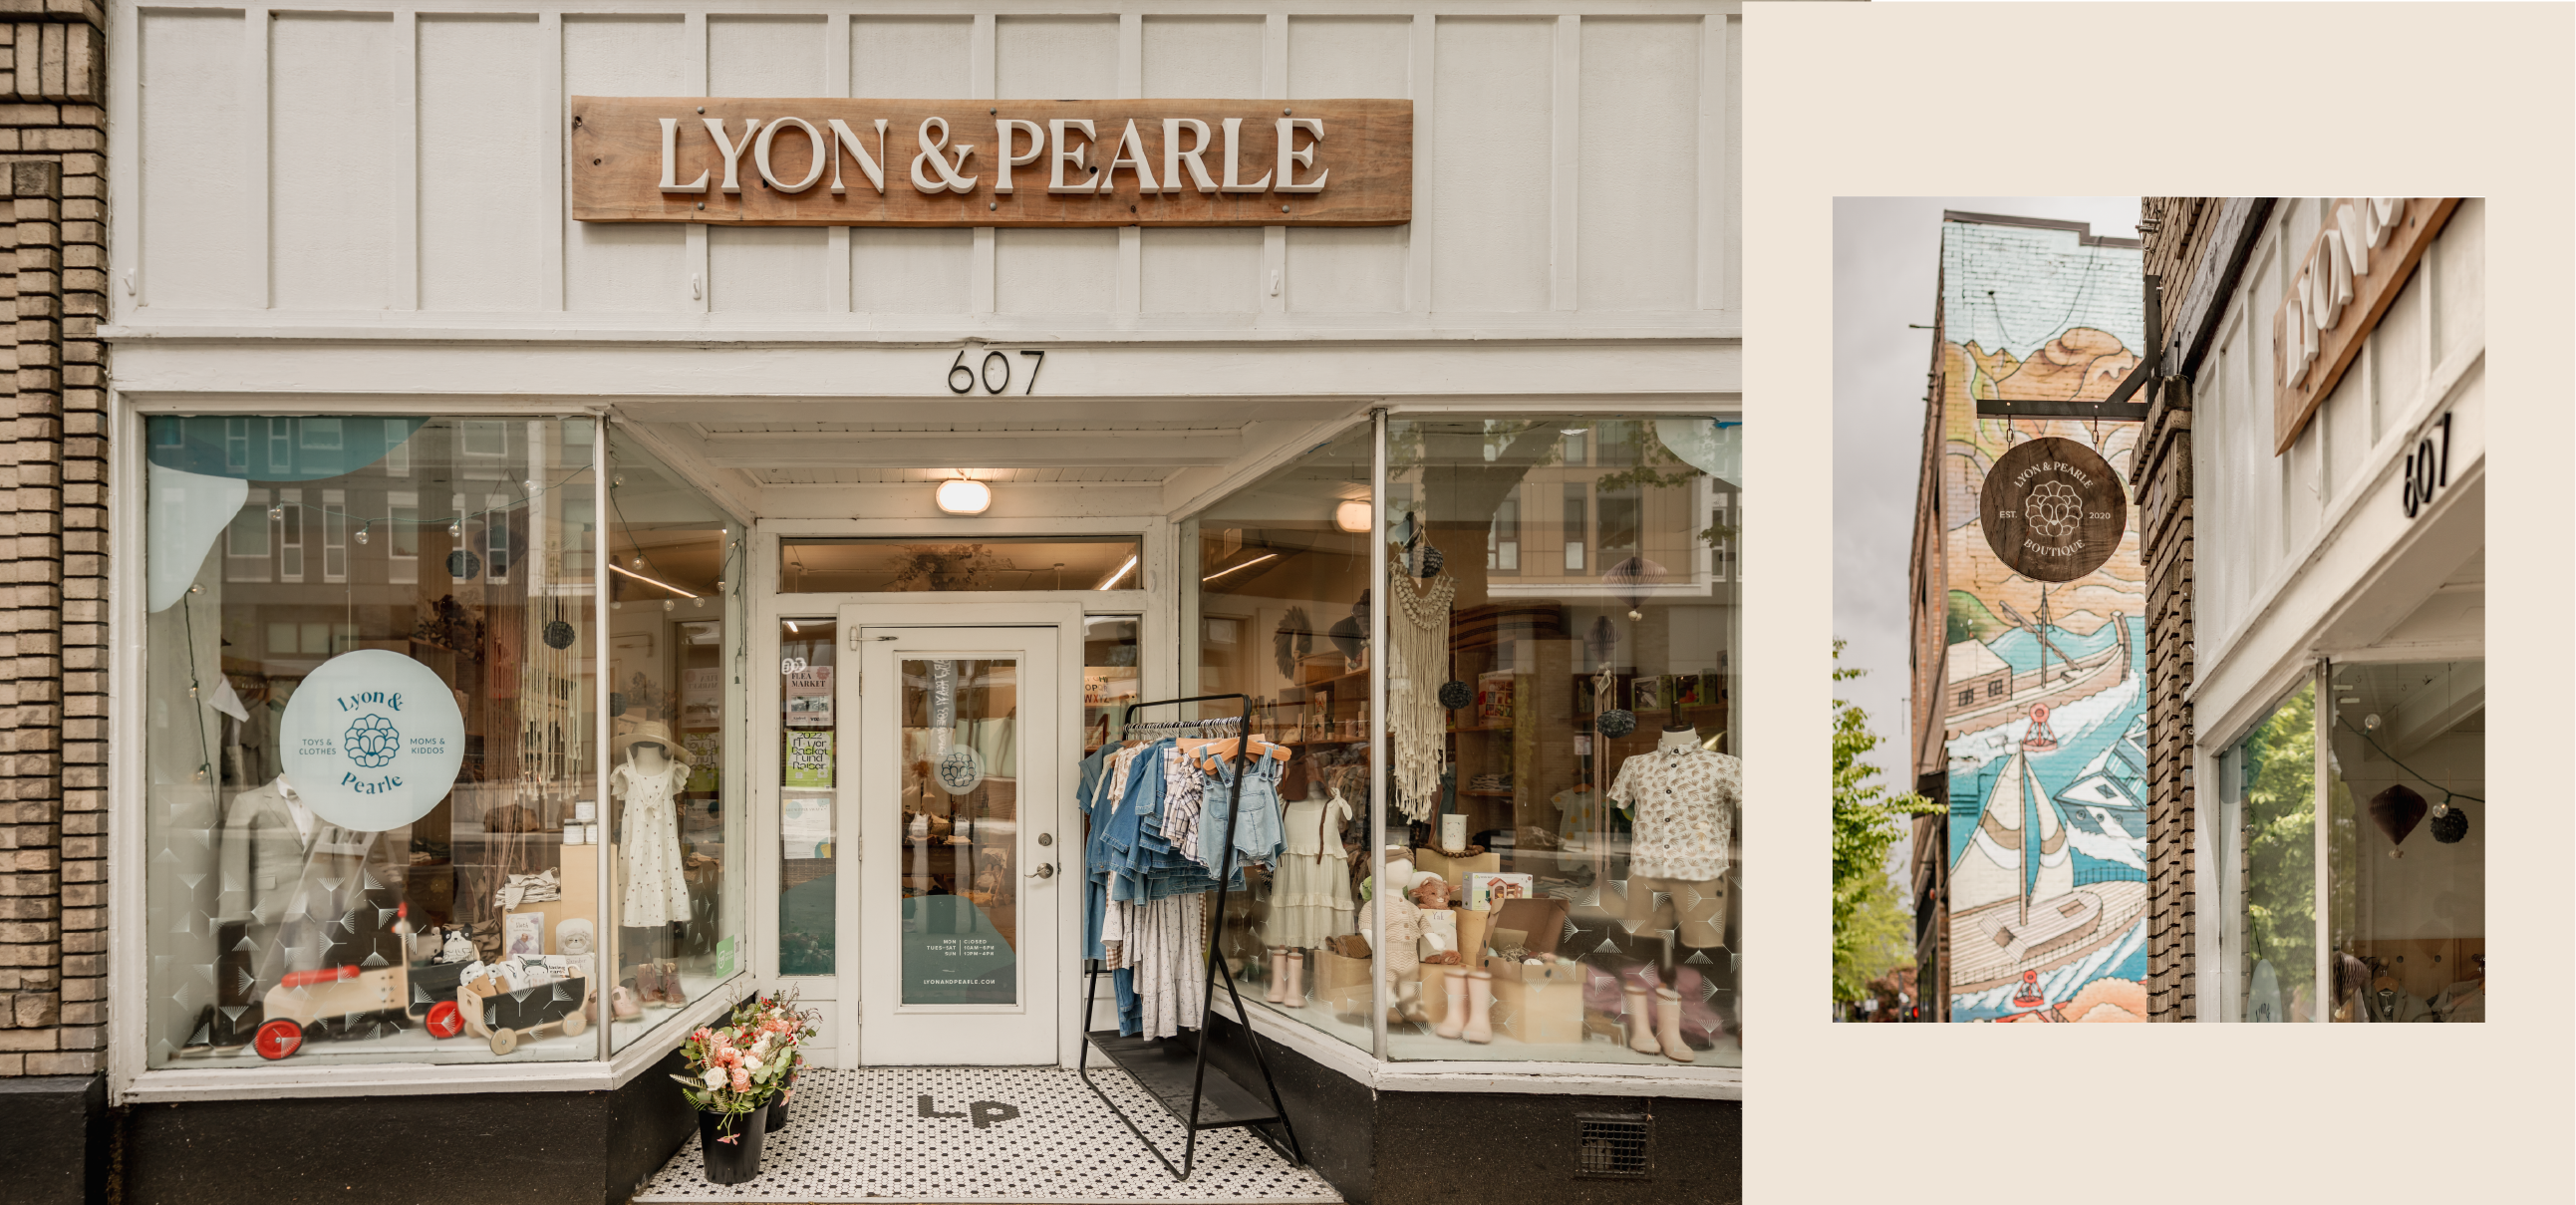 Lyon & Pearle Store 1 of 4